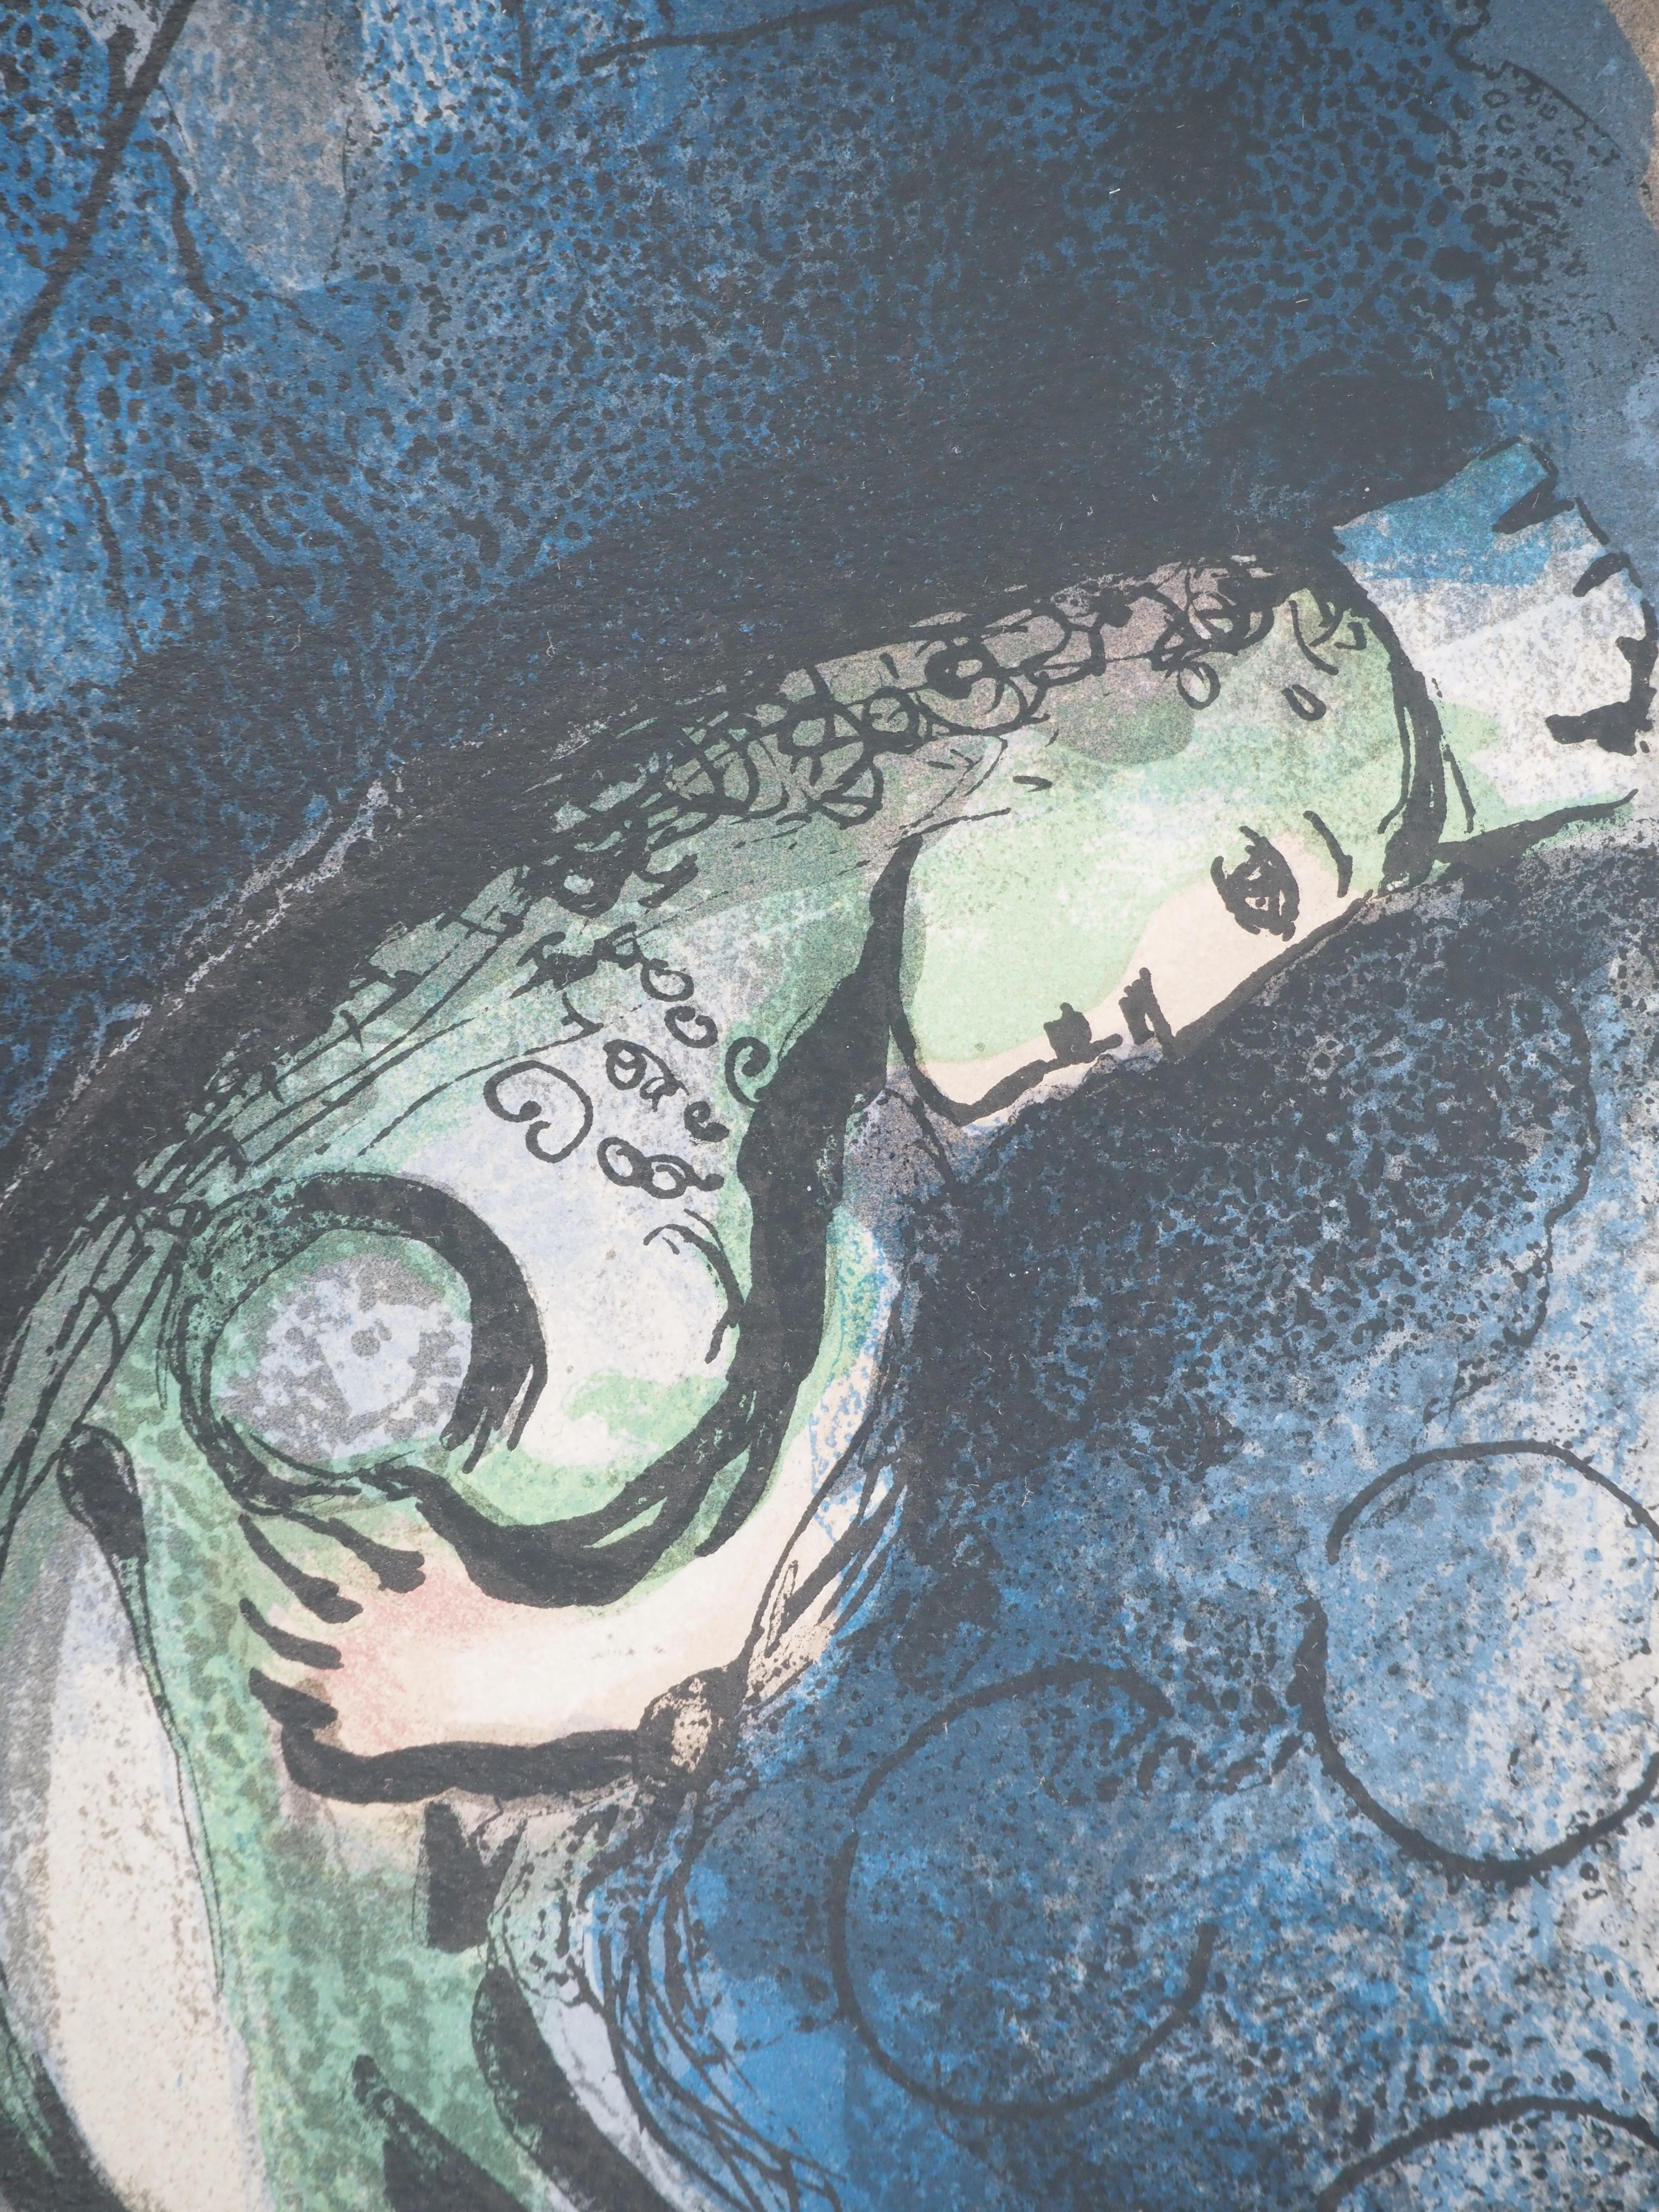 Marc Chagall (1887-1985) 
The Bible, Vashyi Chassed away
Original lithography (Daeger Workshop) 
On paper 36 x 26.5 cm (c. 14.2 x 10.2 in)
Second illustration on the back, see photo n°6 (Mourlot #274) 

REFERENCE: 
Catalogue raisonné Chagall